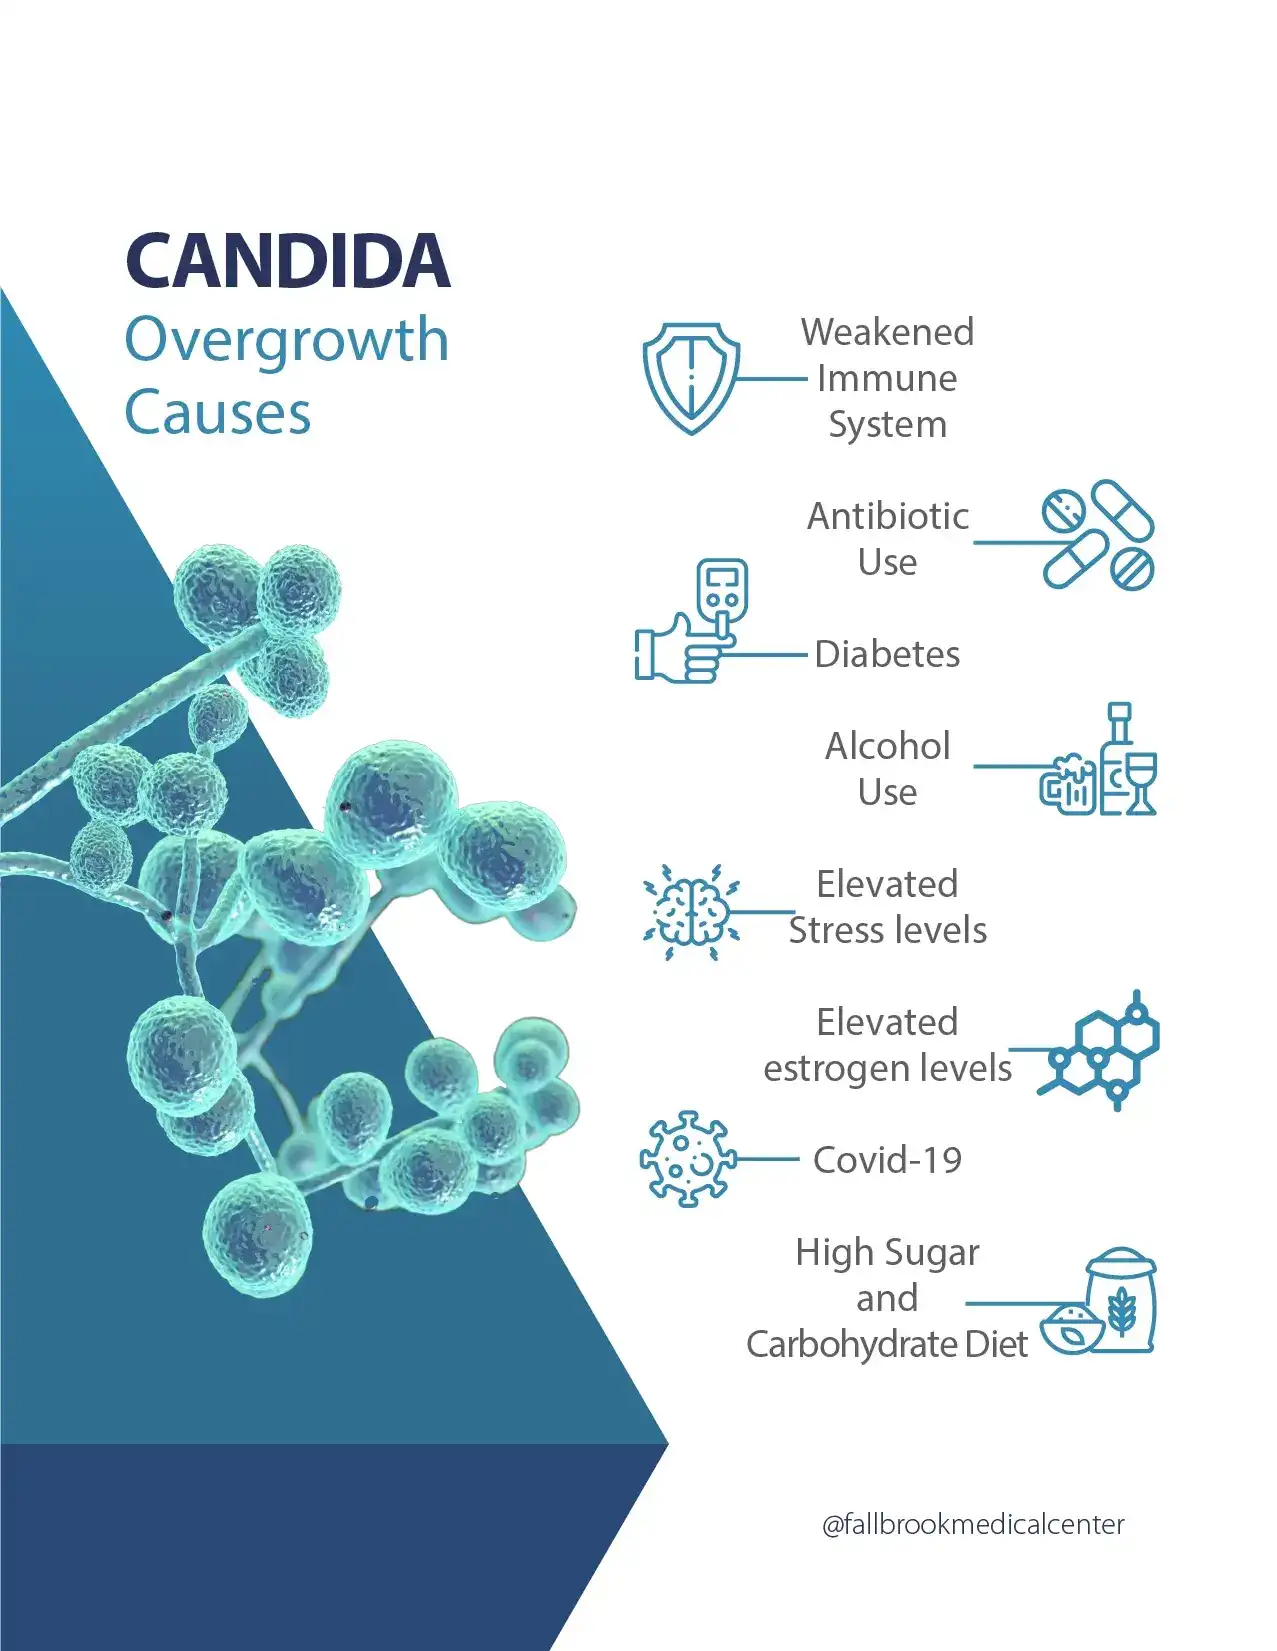 Candida Overgrowth - Causes and Treatment Fallbrook Medical Center